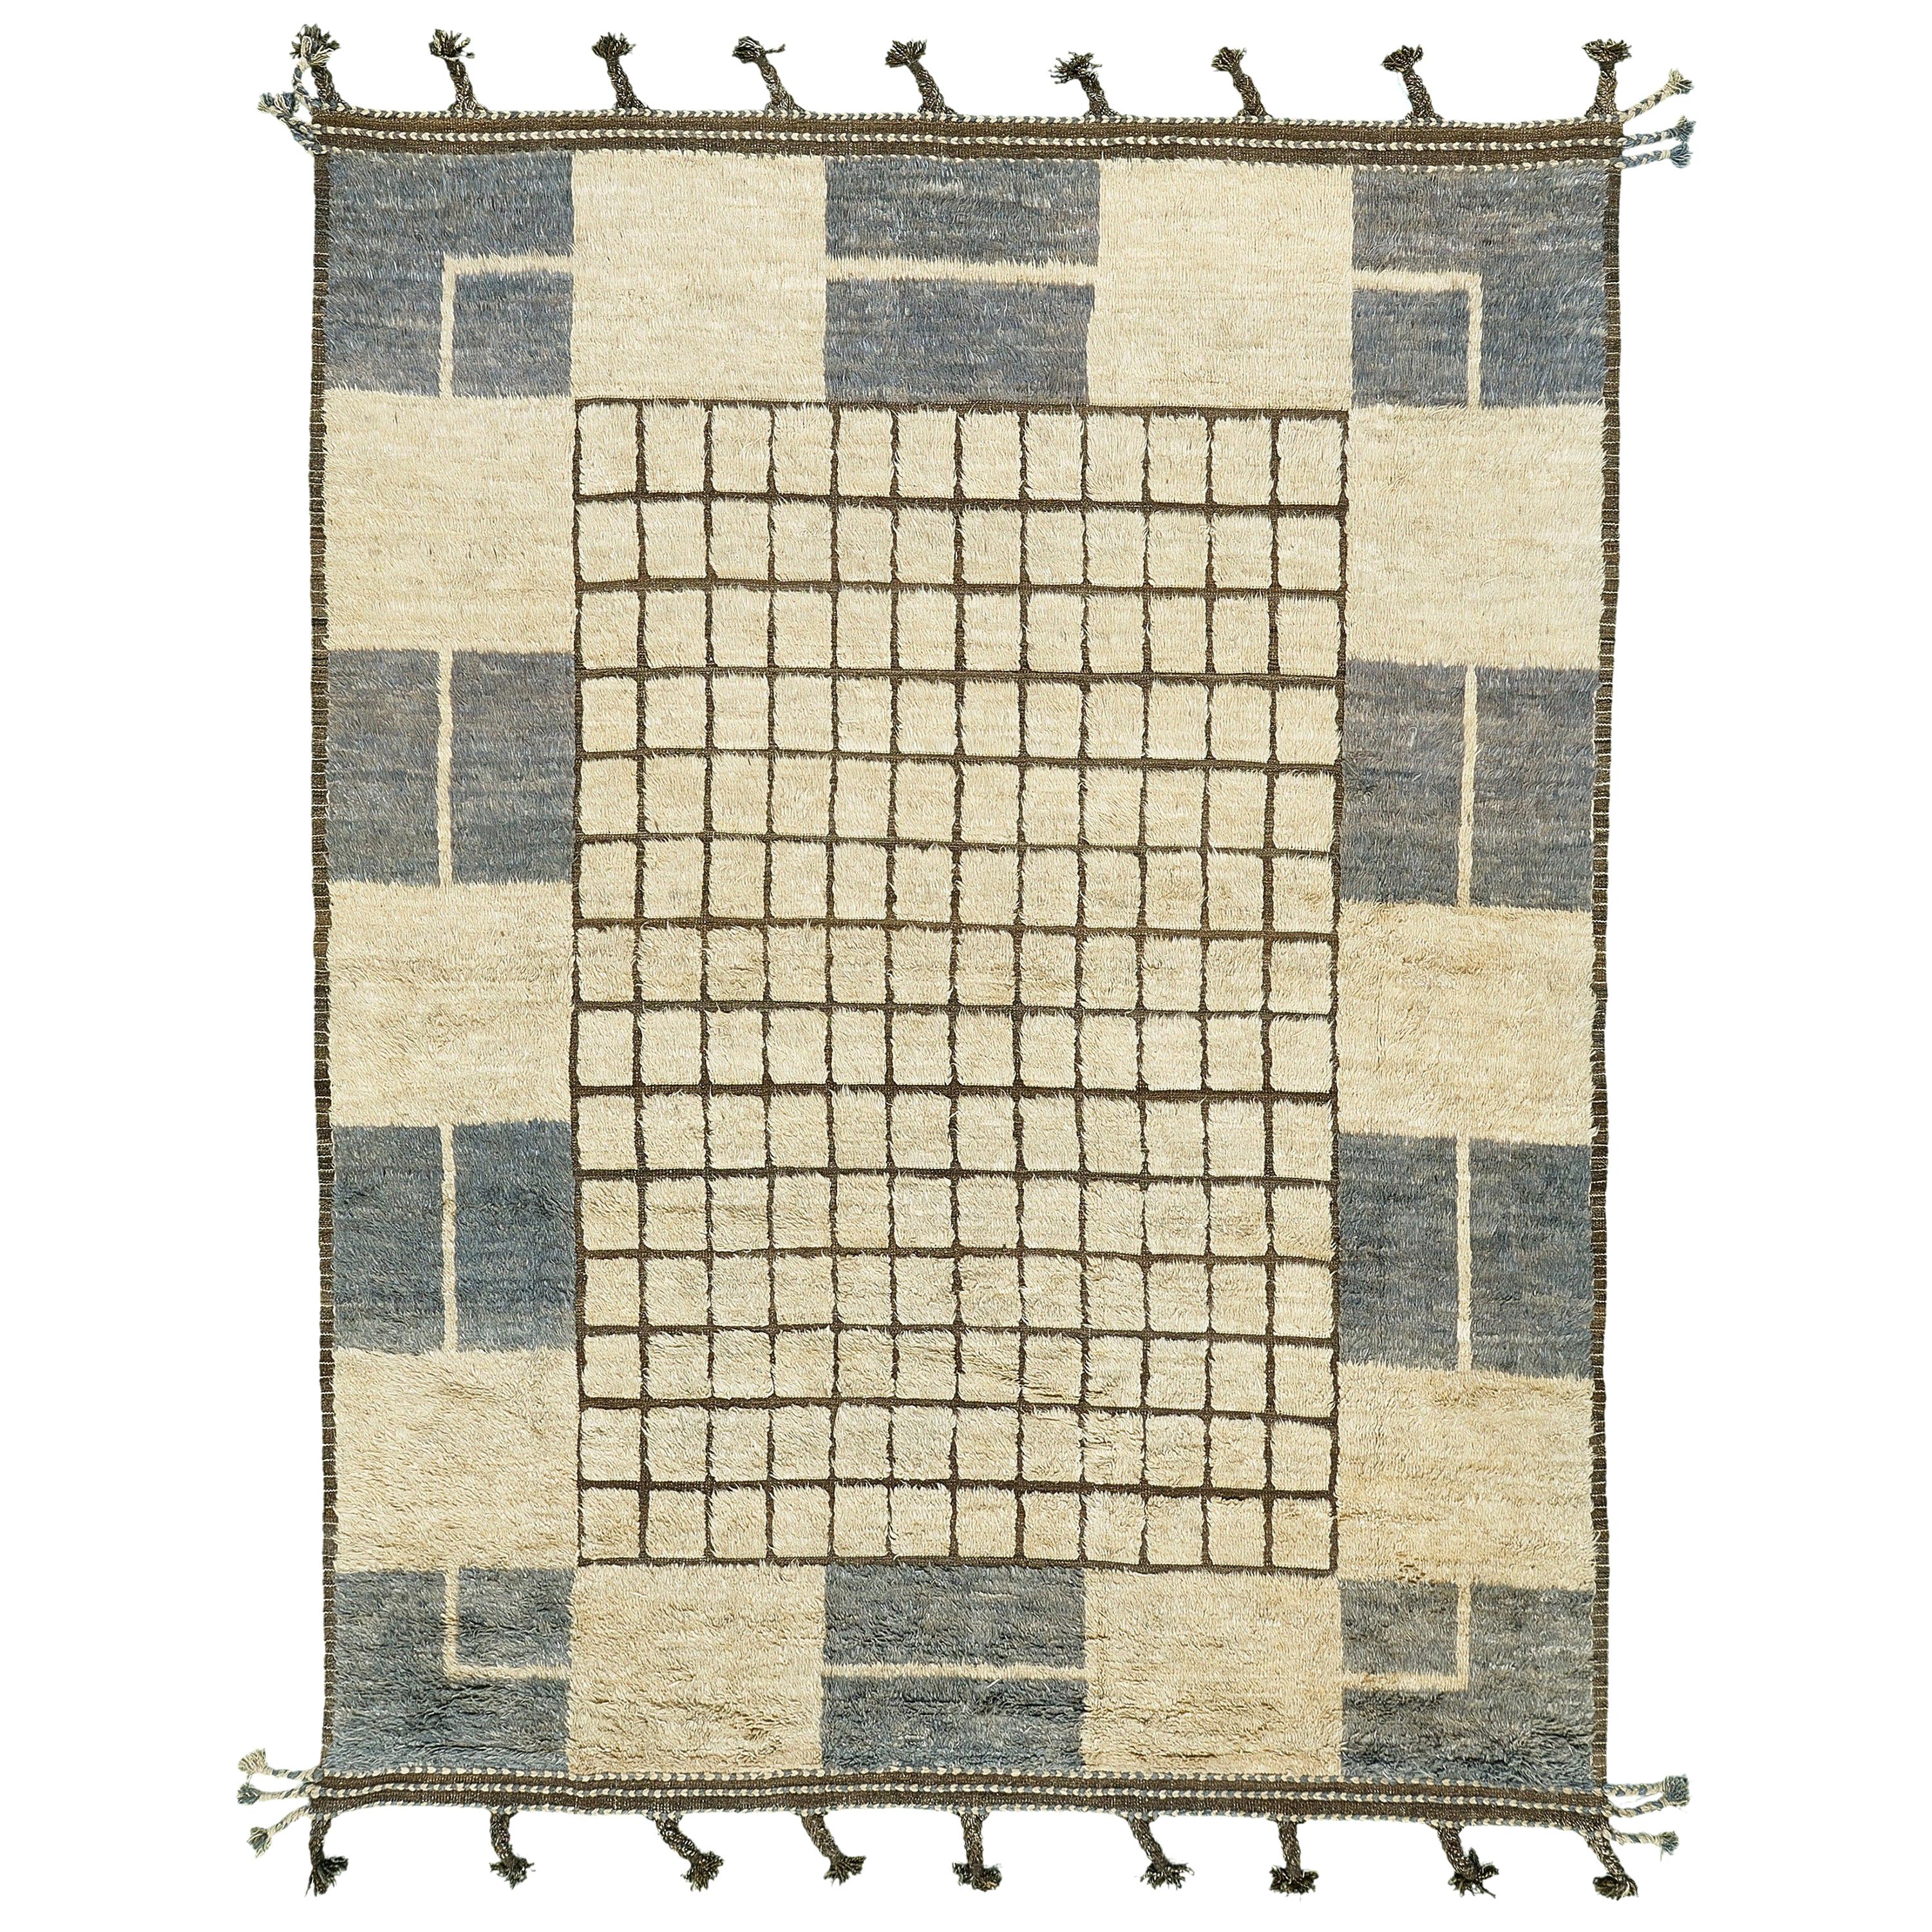 Nazmiyal Collection Modern Boho Chic Rug. Size: 10 ft 2 in x 13 ft 10 in